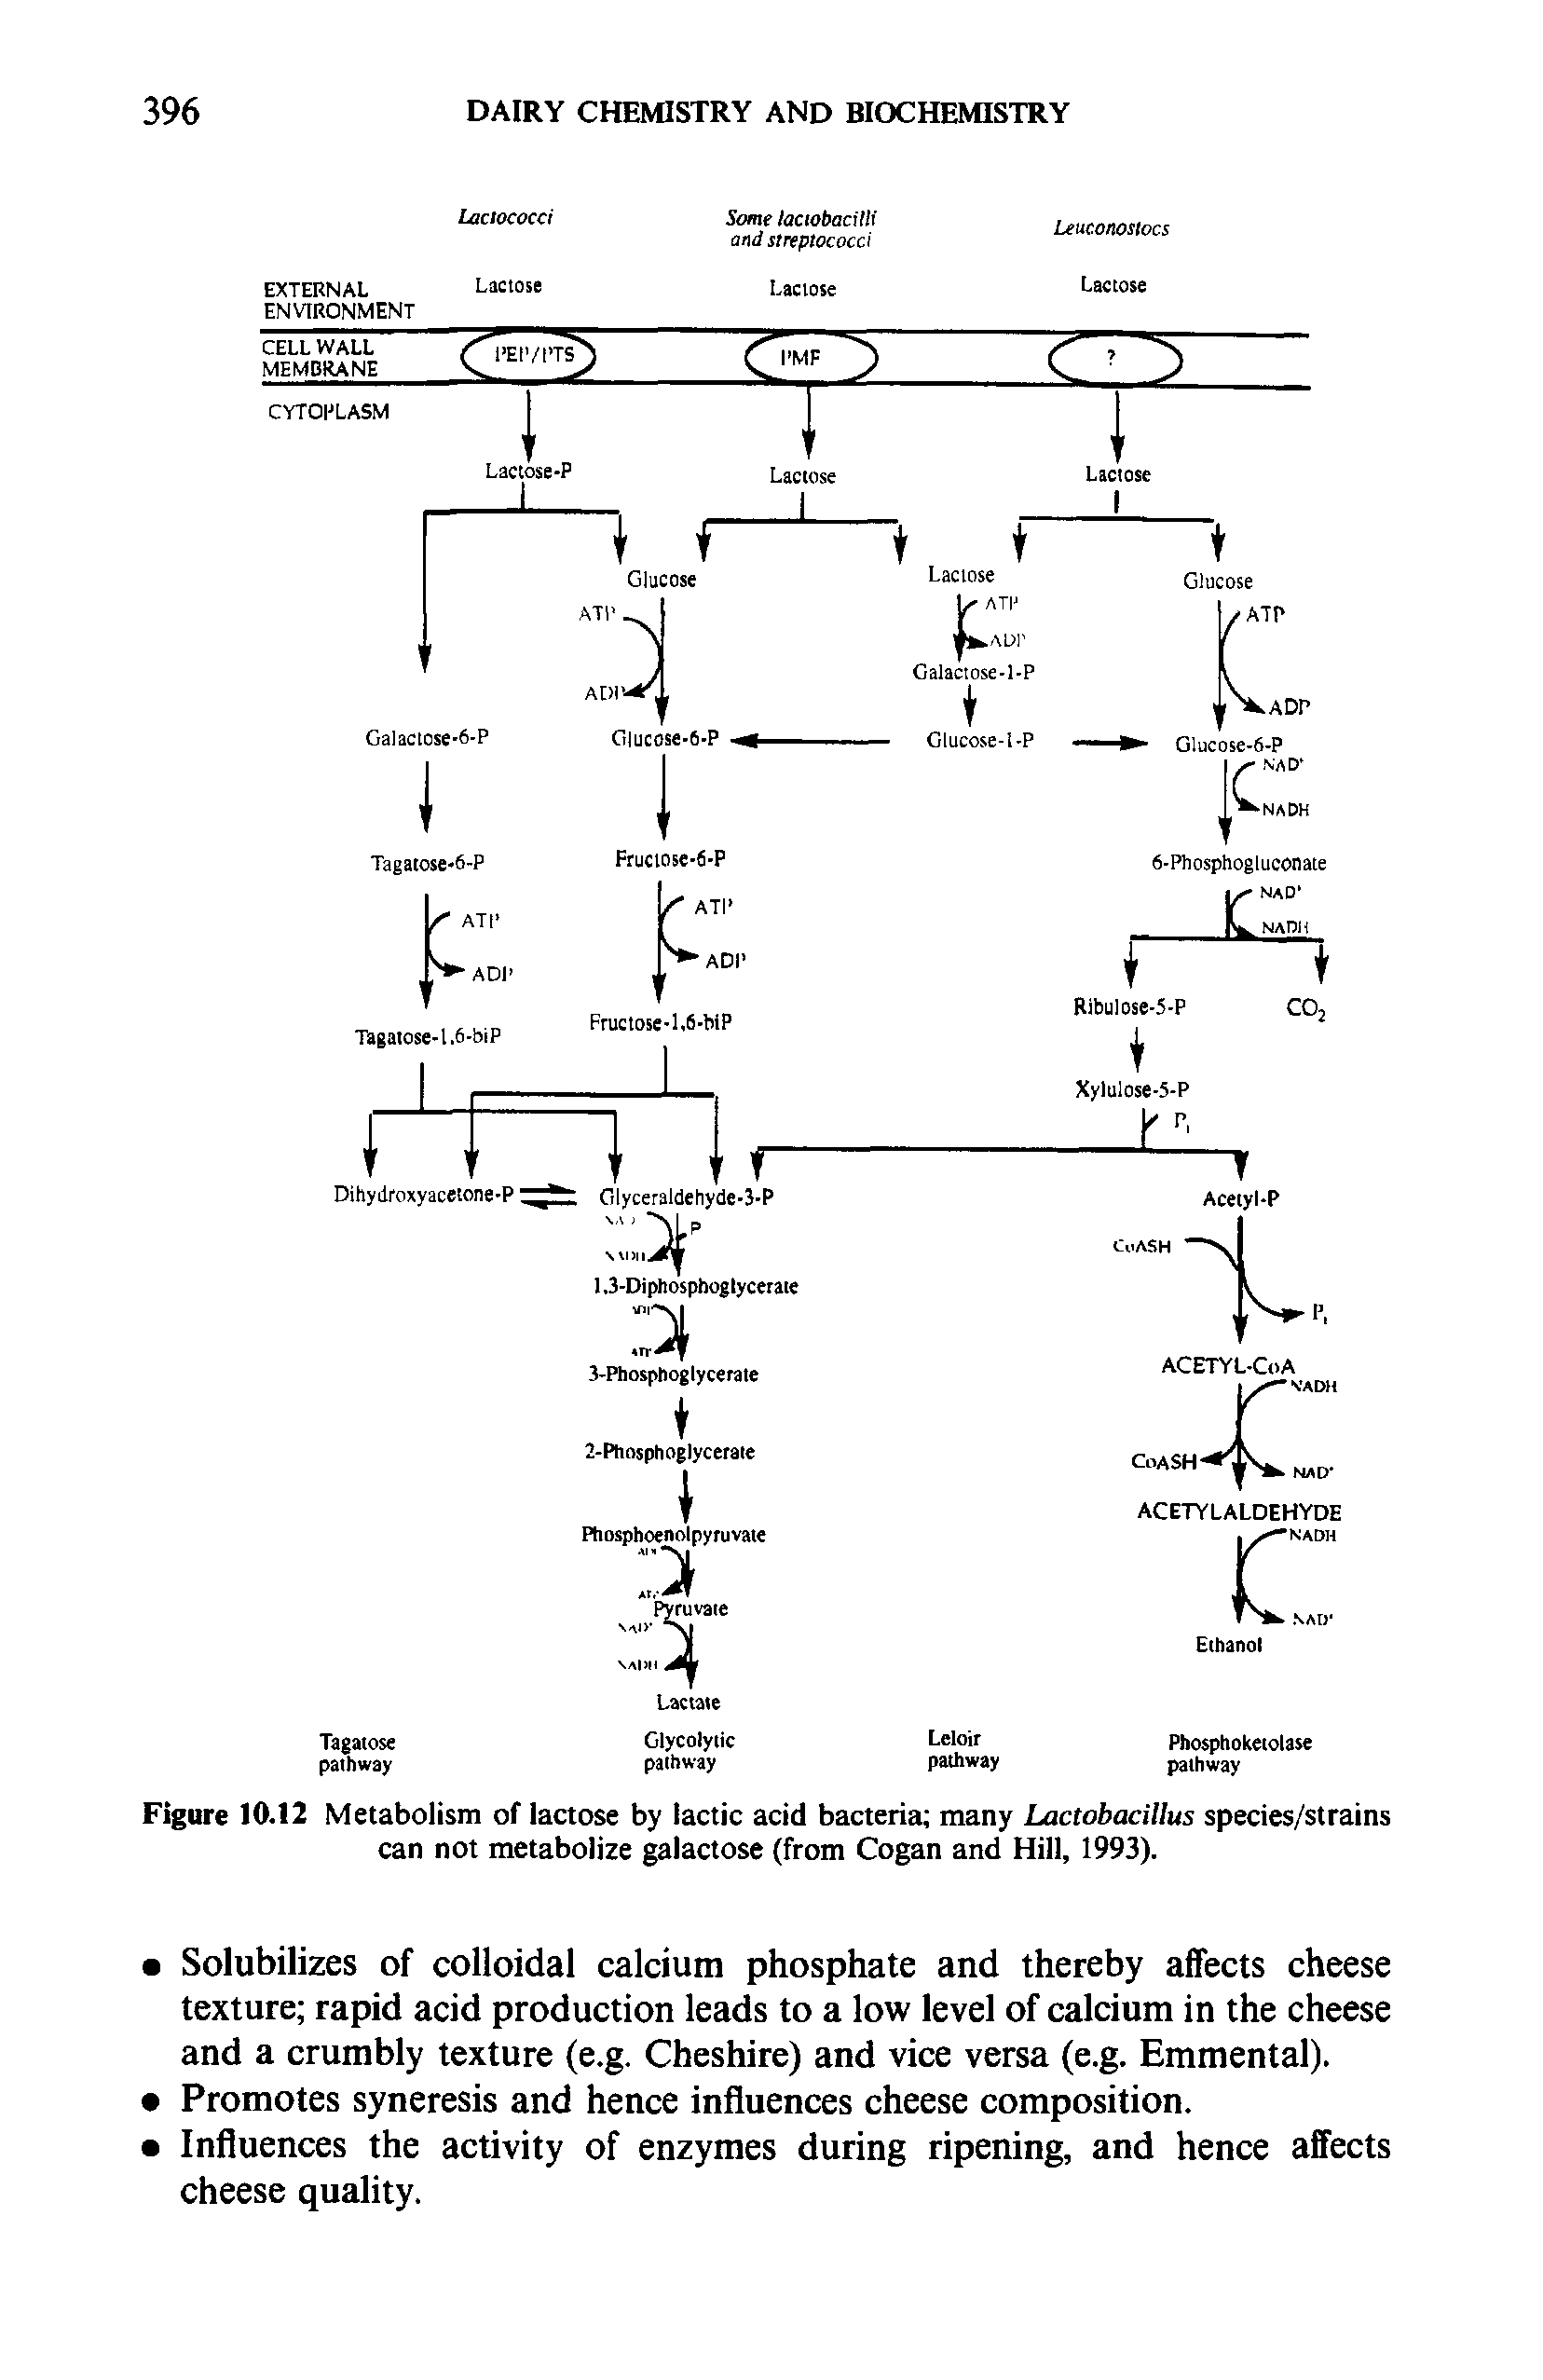 Figure 10.12 Metabolism of lactose by lactic acid bacteria many Lactobacillus species/strains can not metabolize galactose (from Cogan and Hill, 1993).